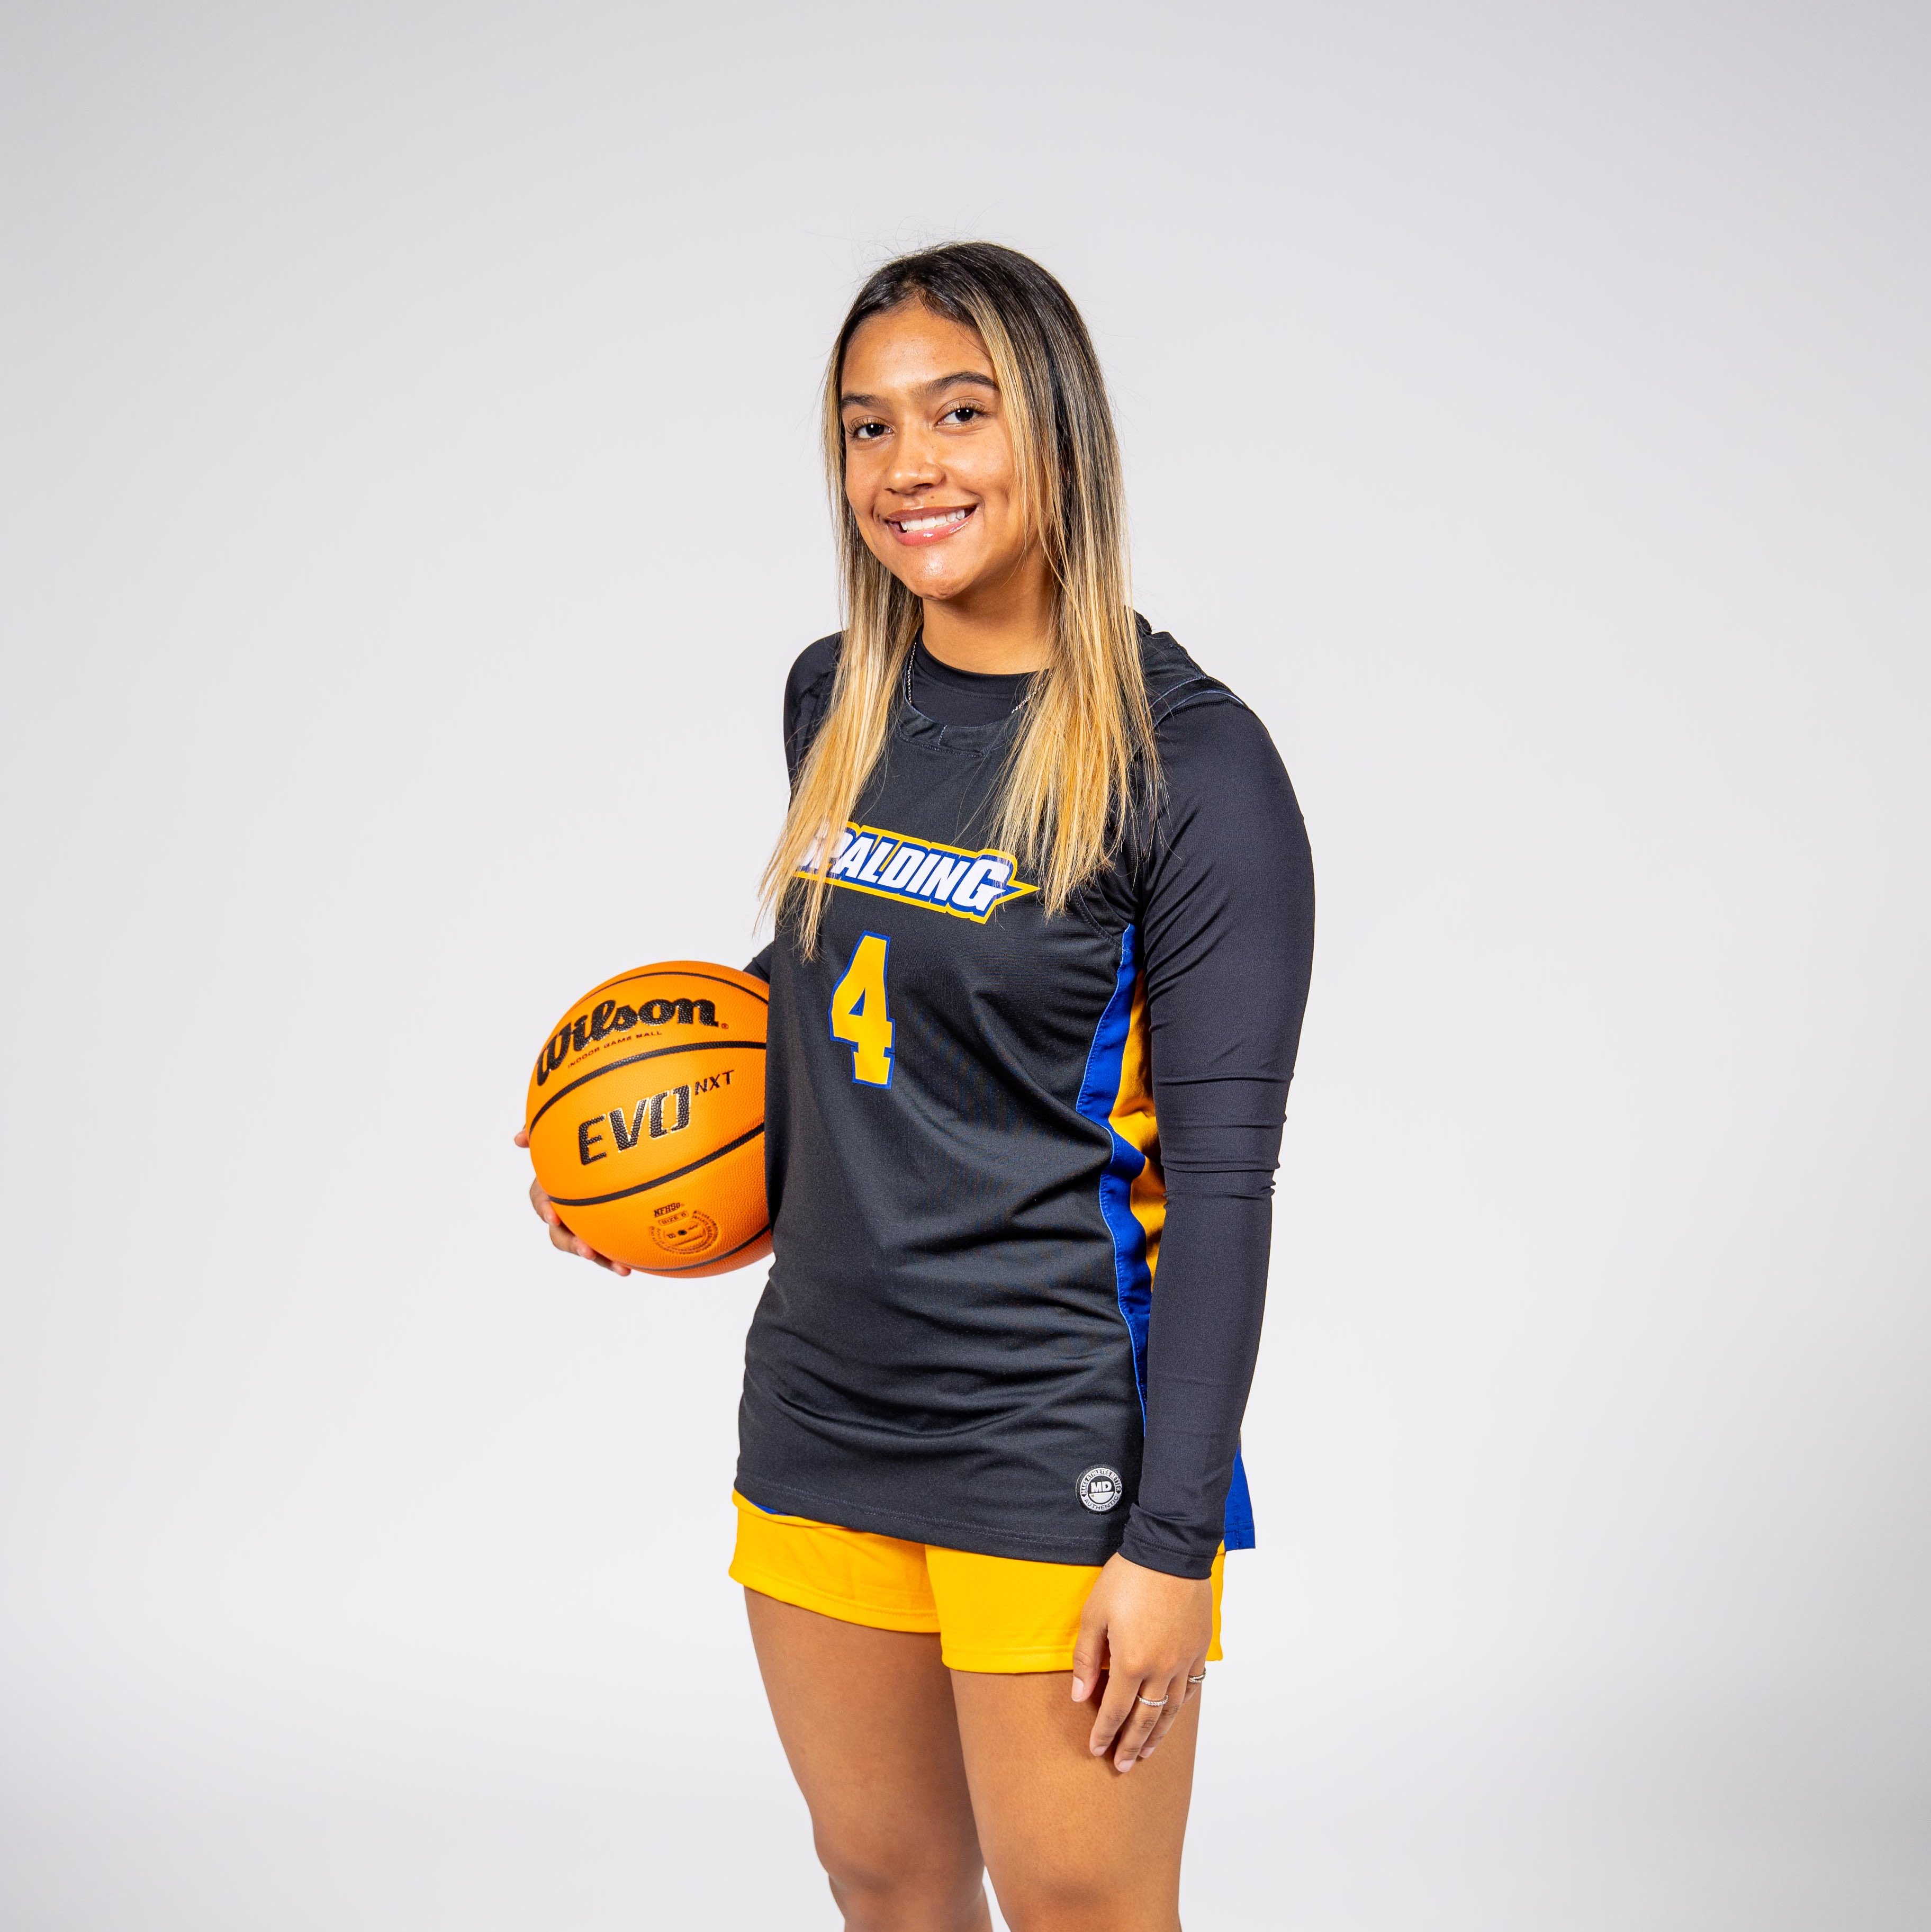 Isis Rodgers athlete profile head shot